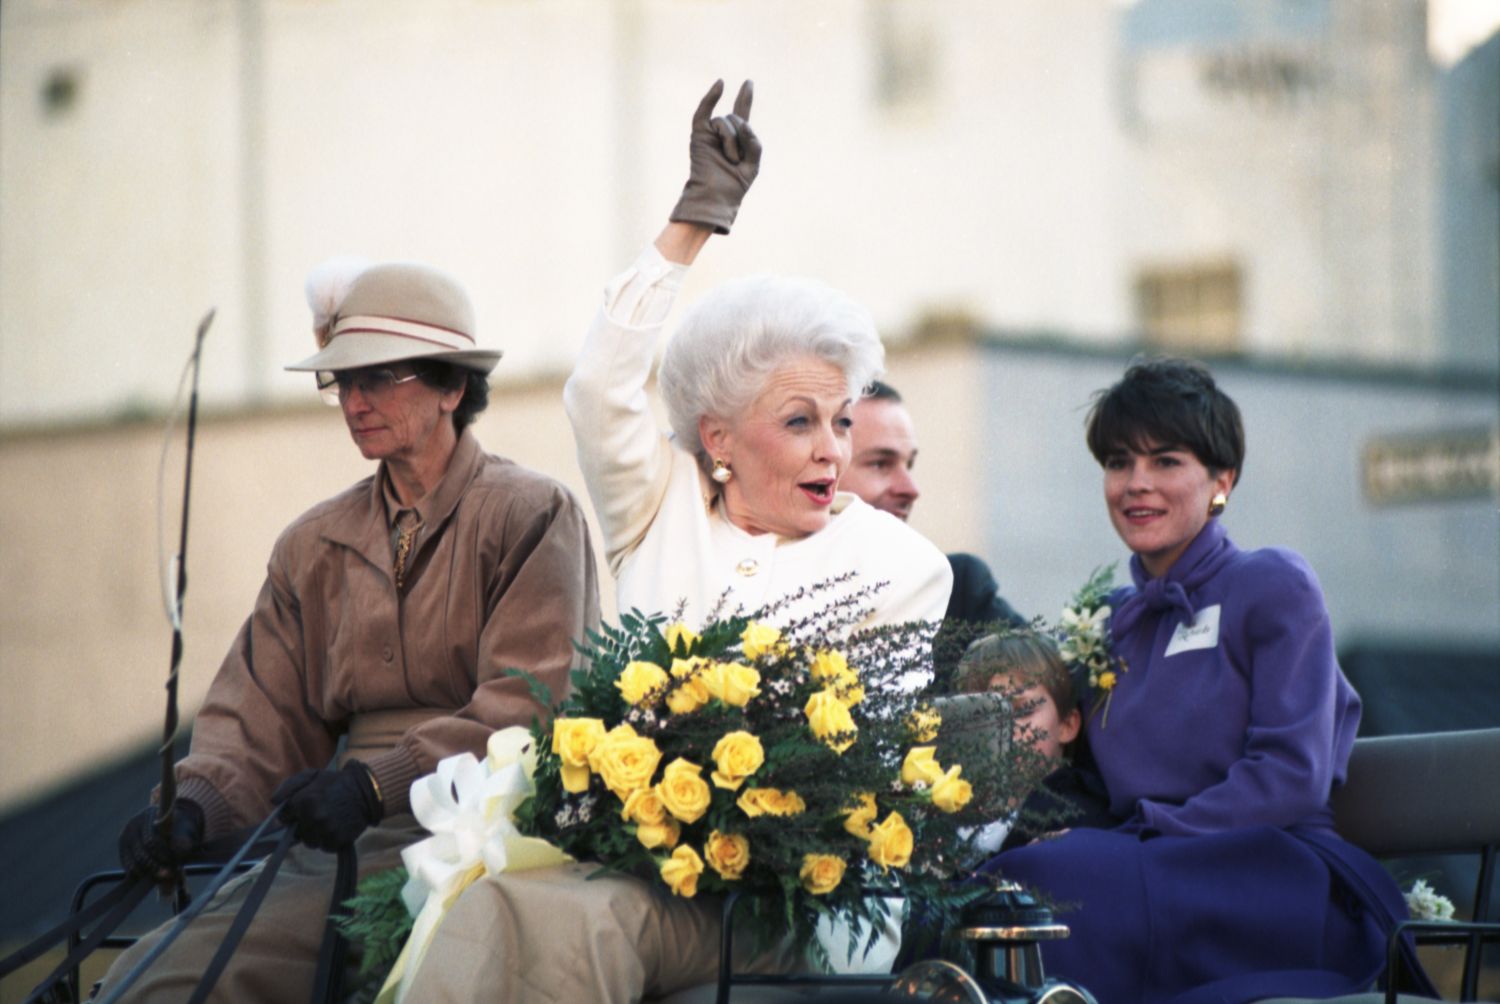  Inauguration of Texas Governor Ann Richards in Austin, Texas. Richards is seen in a horse-drawn carriage, carrying a bouquet of yellow roses and gesturing with up a "Hook 'Em" Texas Longhorns sign with her right hand. Richards' youngest daughter, Ellen Richards, is seen seated behind her in a purple coat.